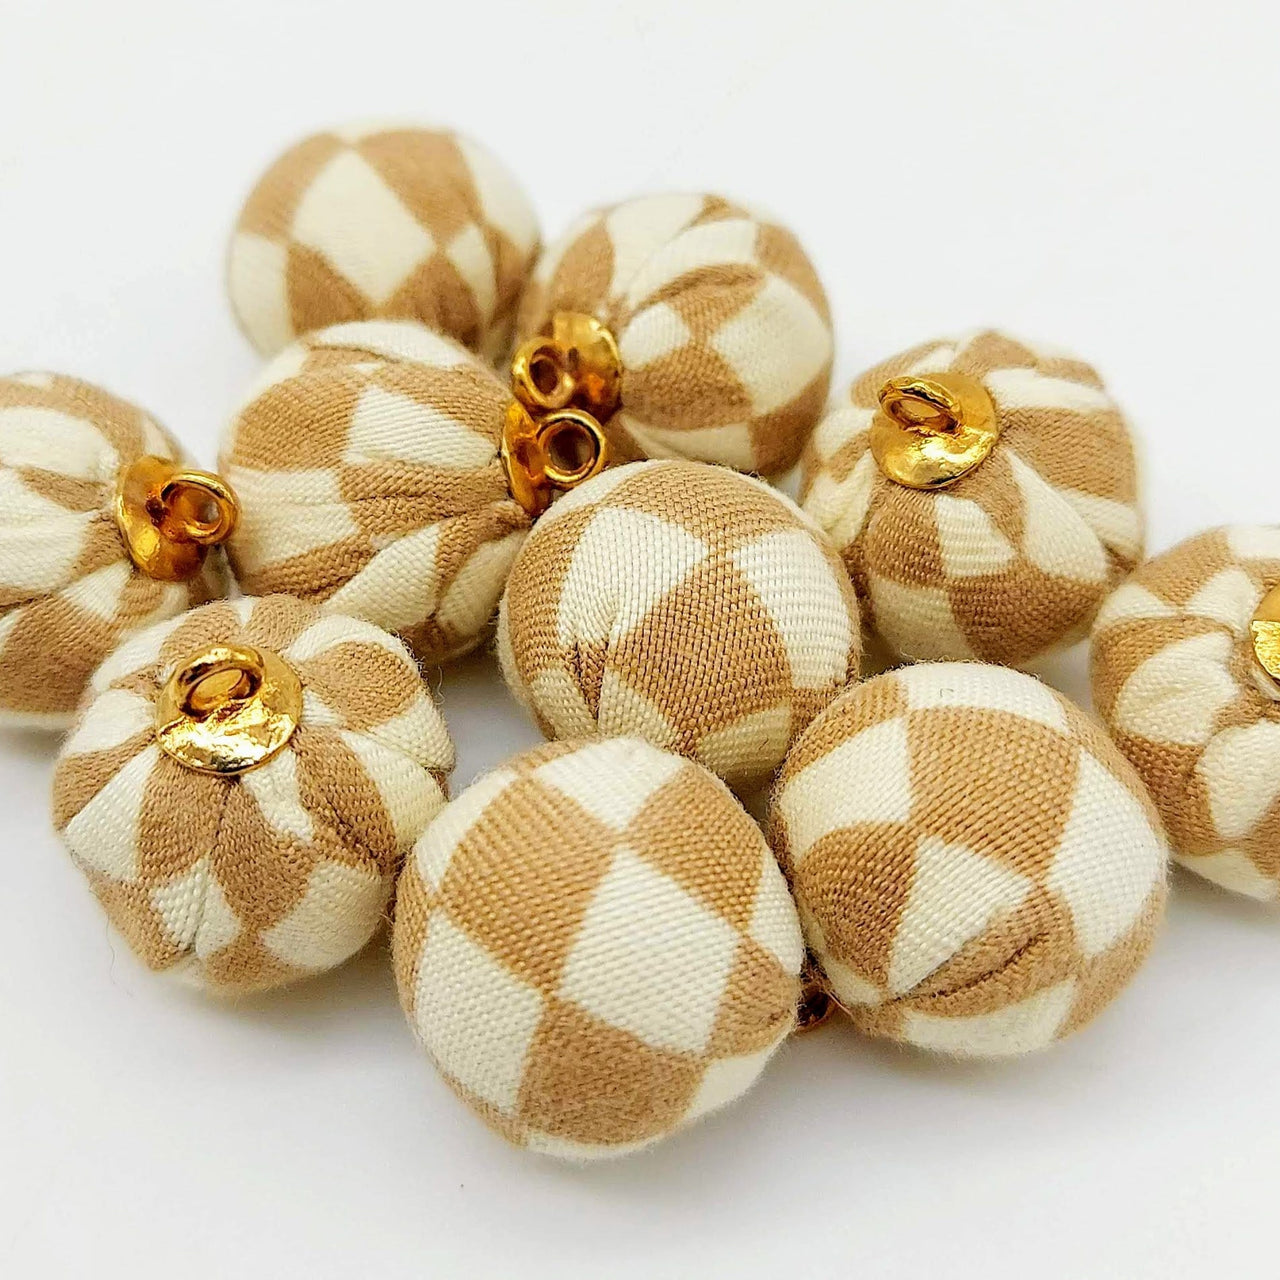 Brown and White Checkered Cotton Fabric Balls Tassel, Button with Ring Cap, Decorative Tassels